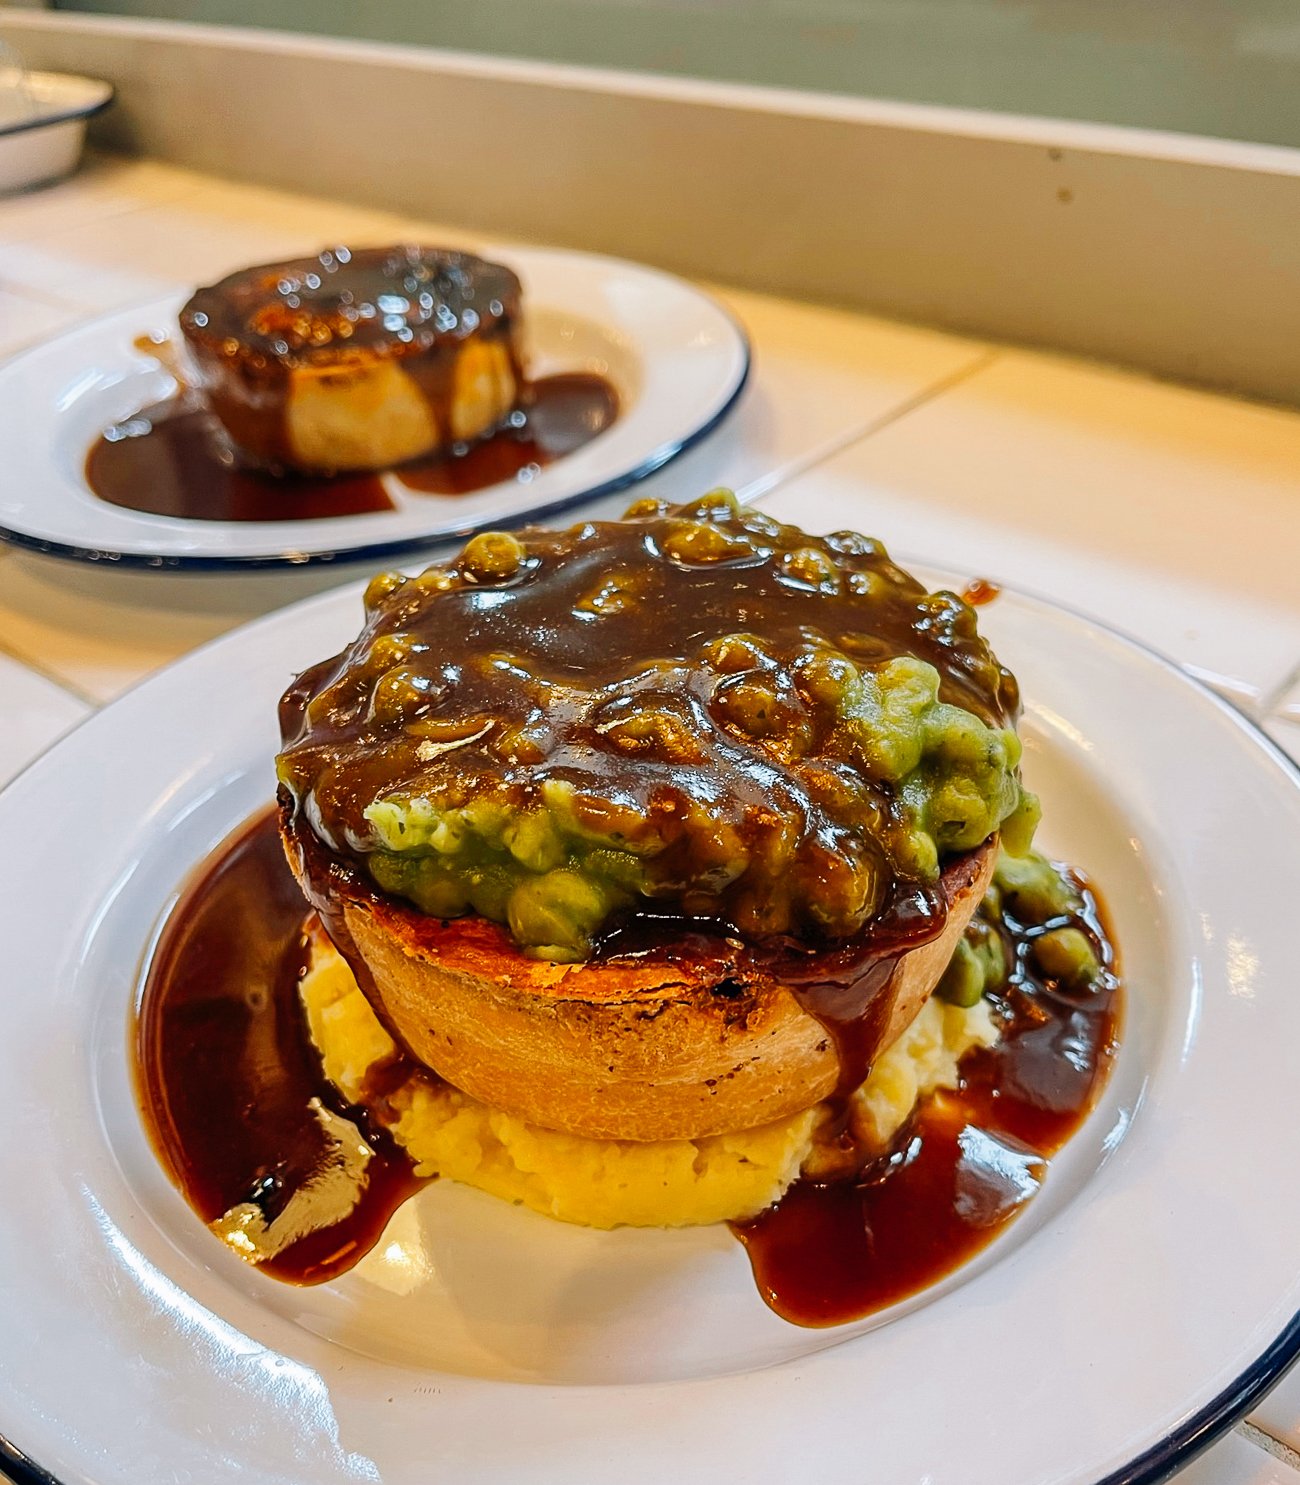 Chicken and Mushroom Pie on top of mashed potatoes, covered in mushy peas and dark brown gravy